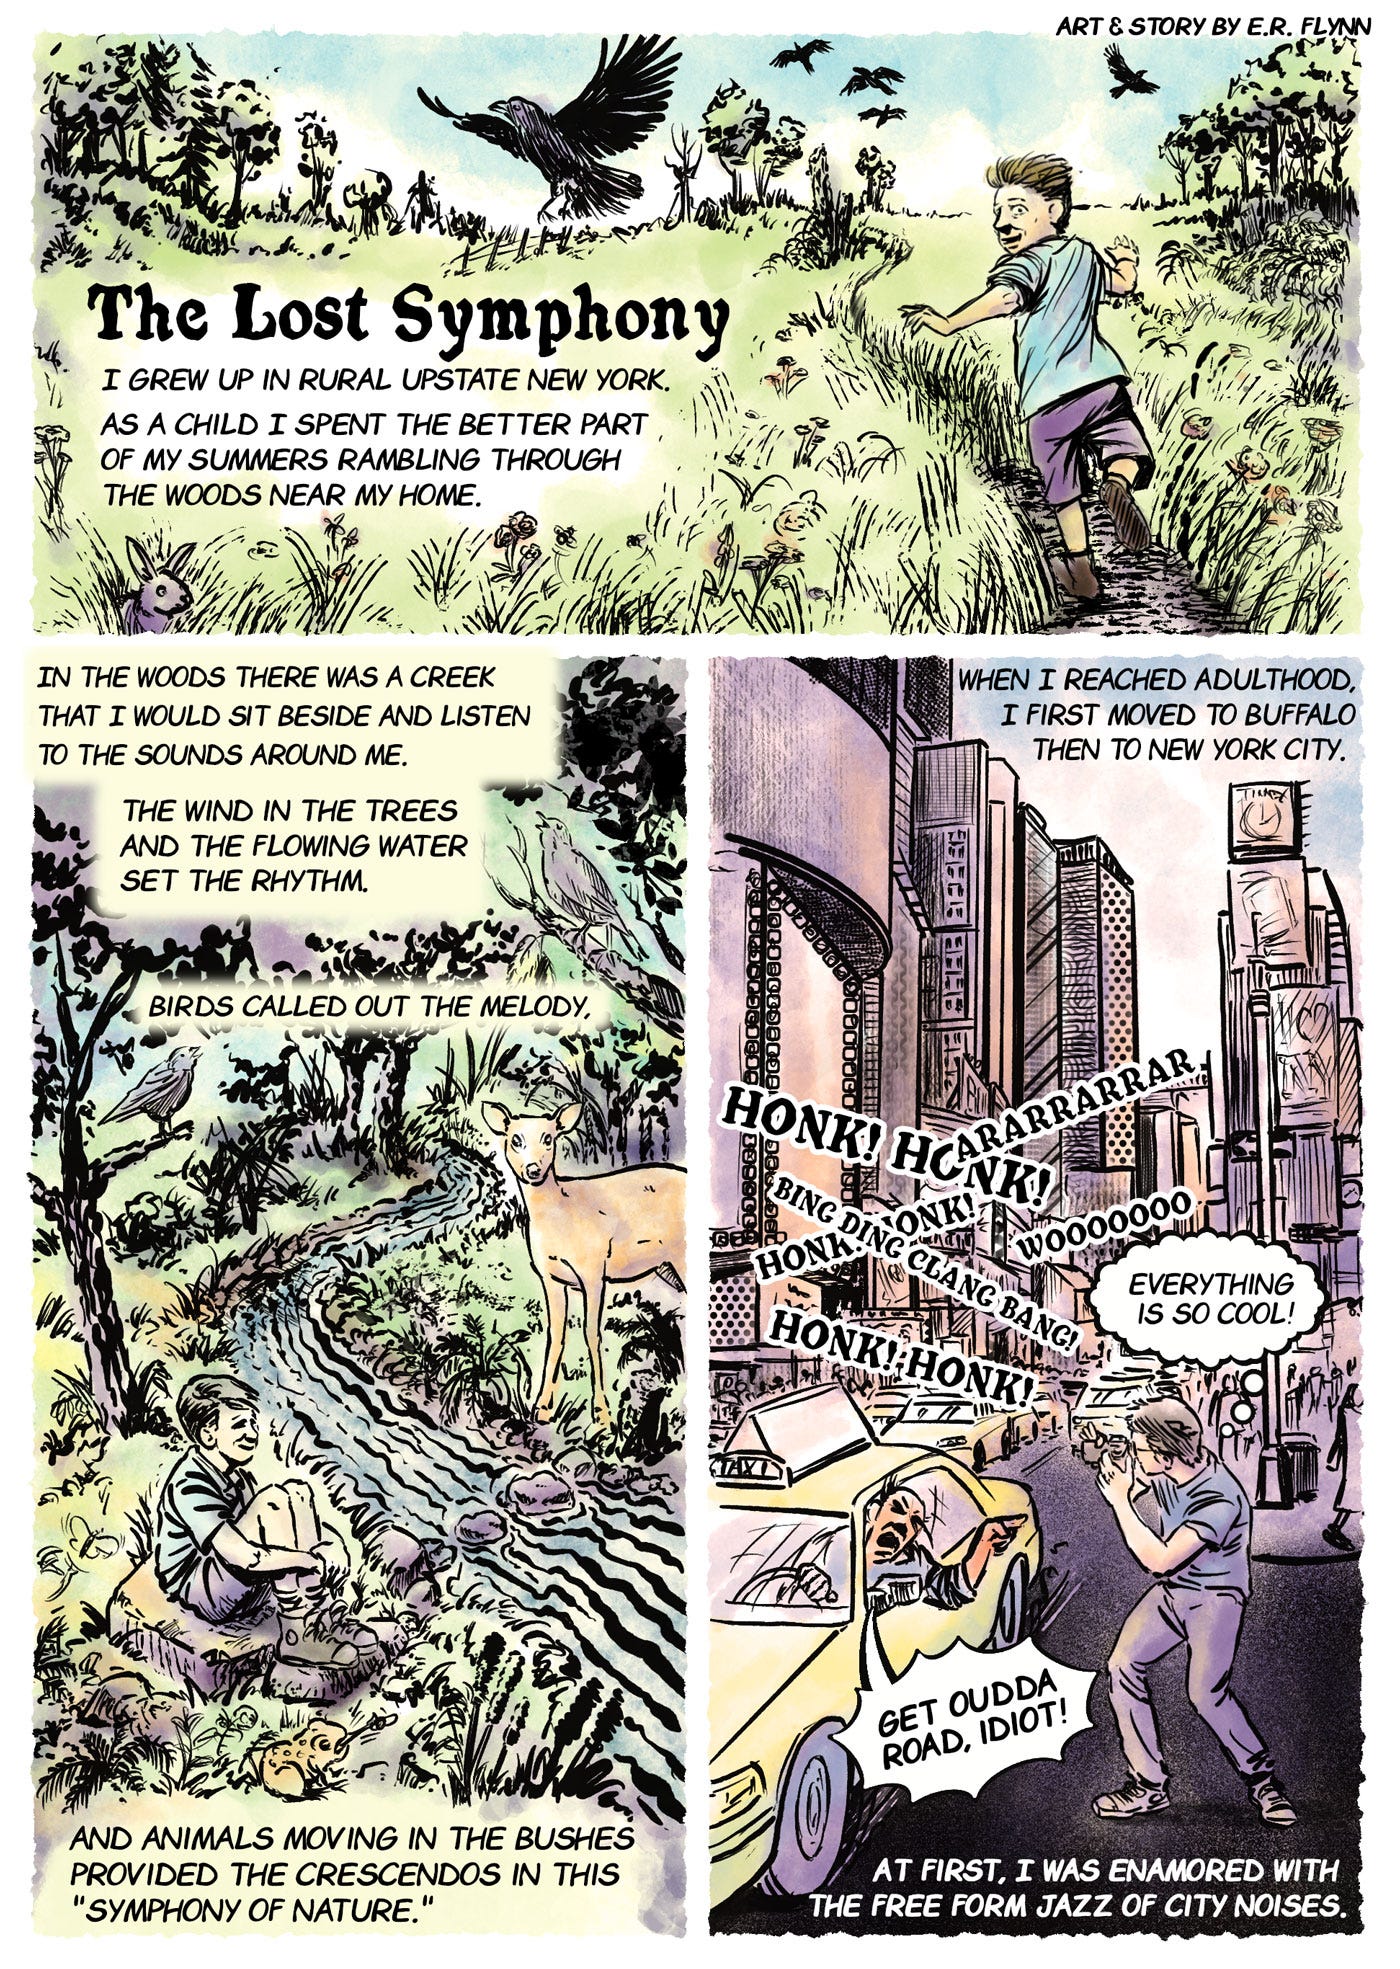 The Lost Symphony Page 1 - Comic by ERFlynn